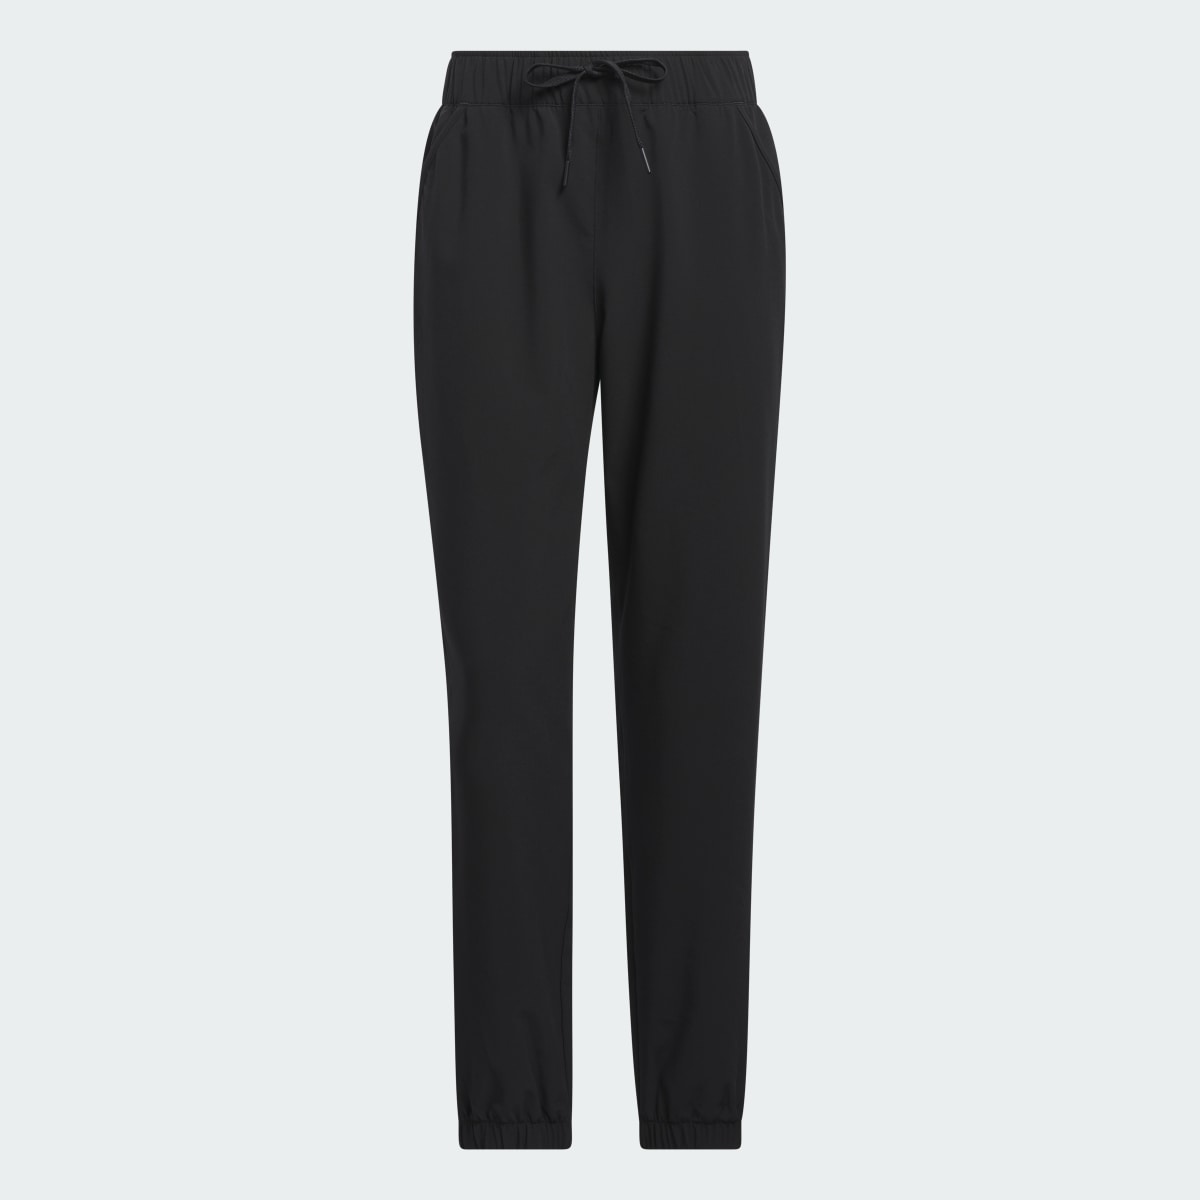 Adidas Women's Ultimate365 Joggers. 4